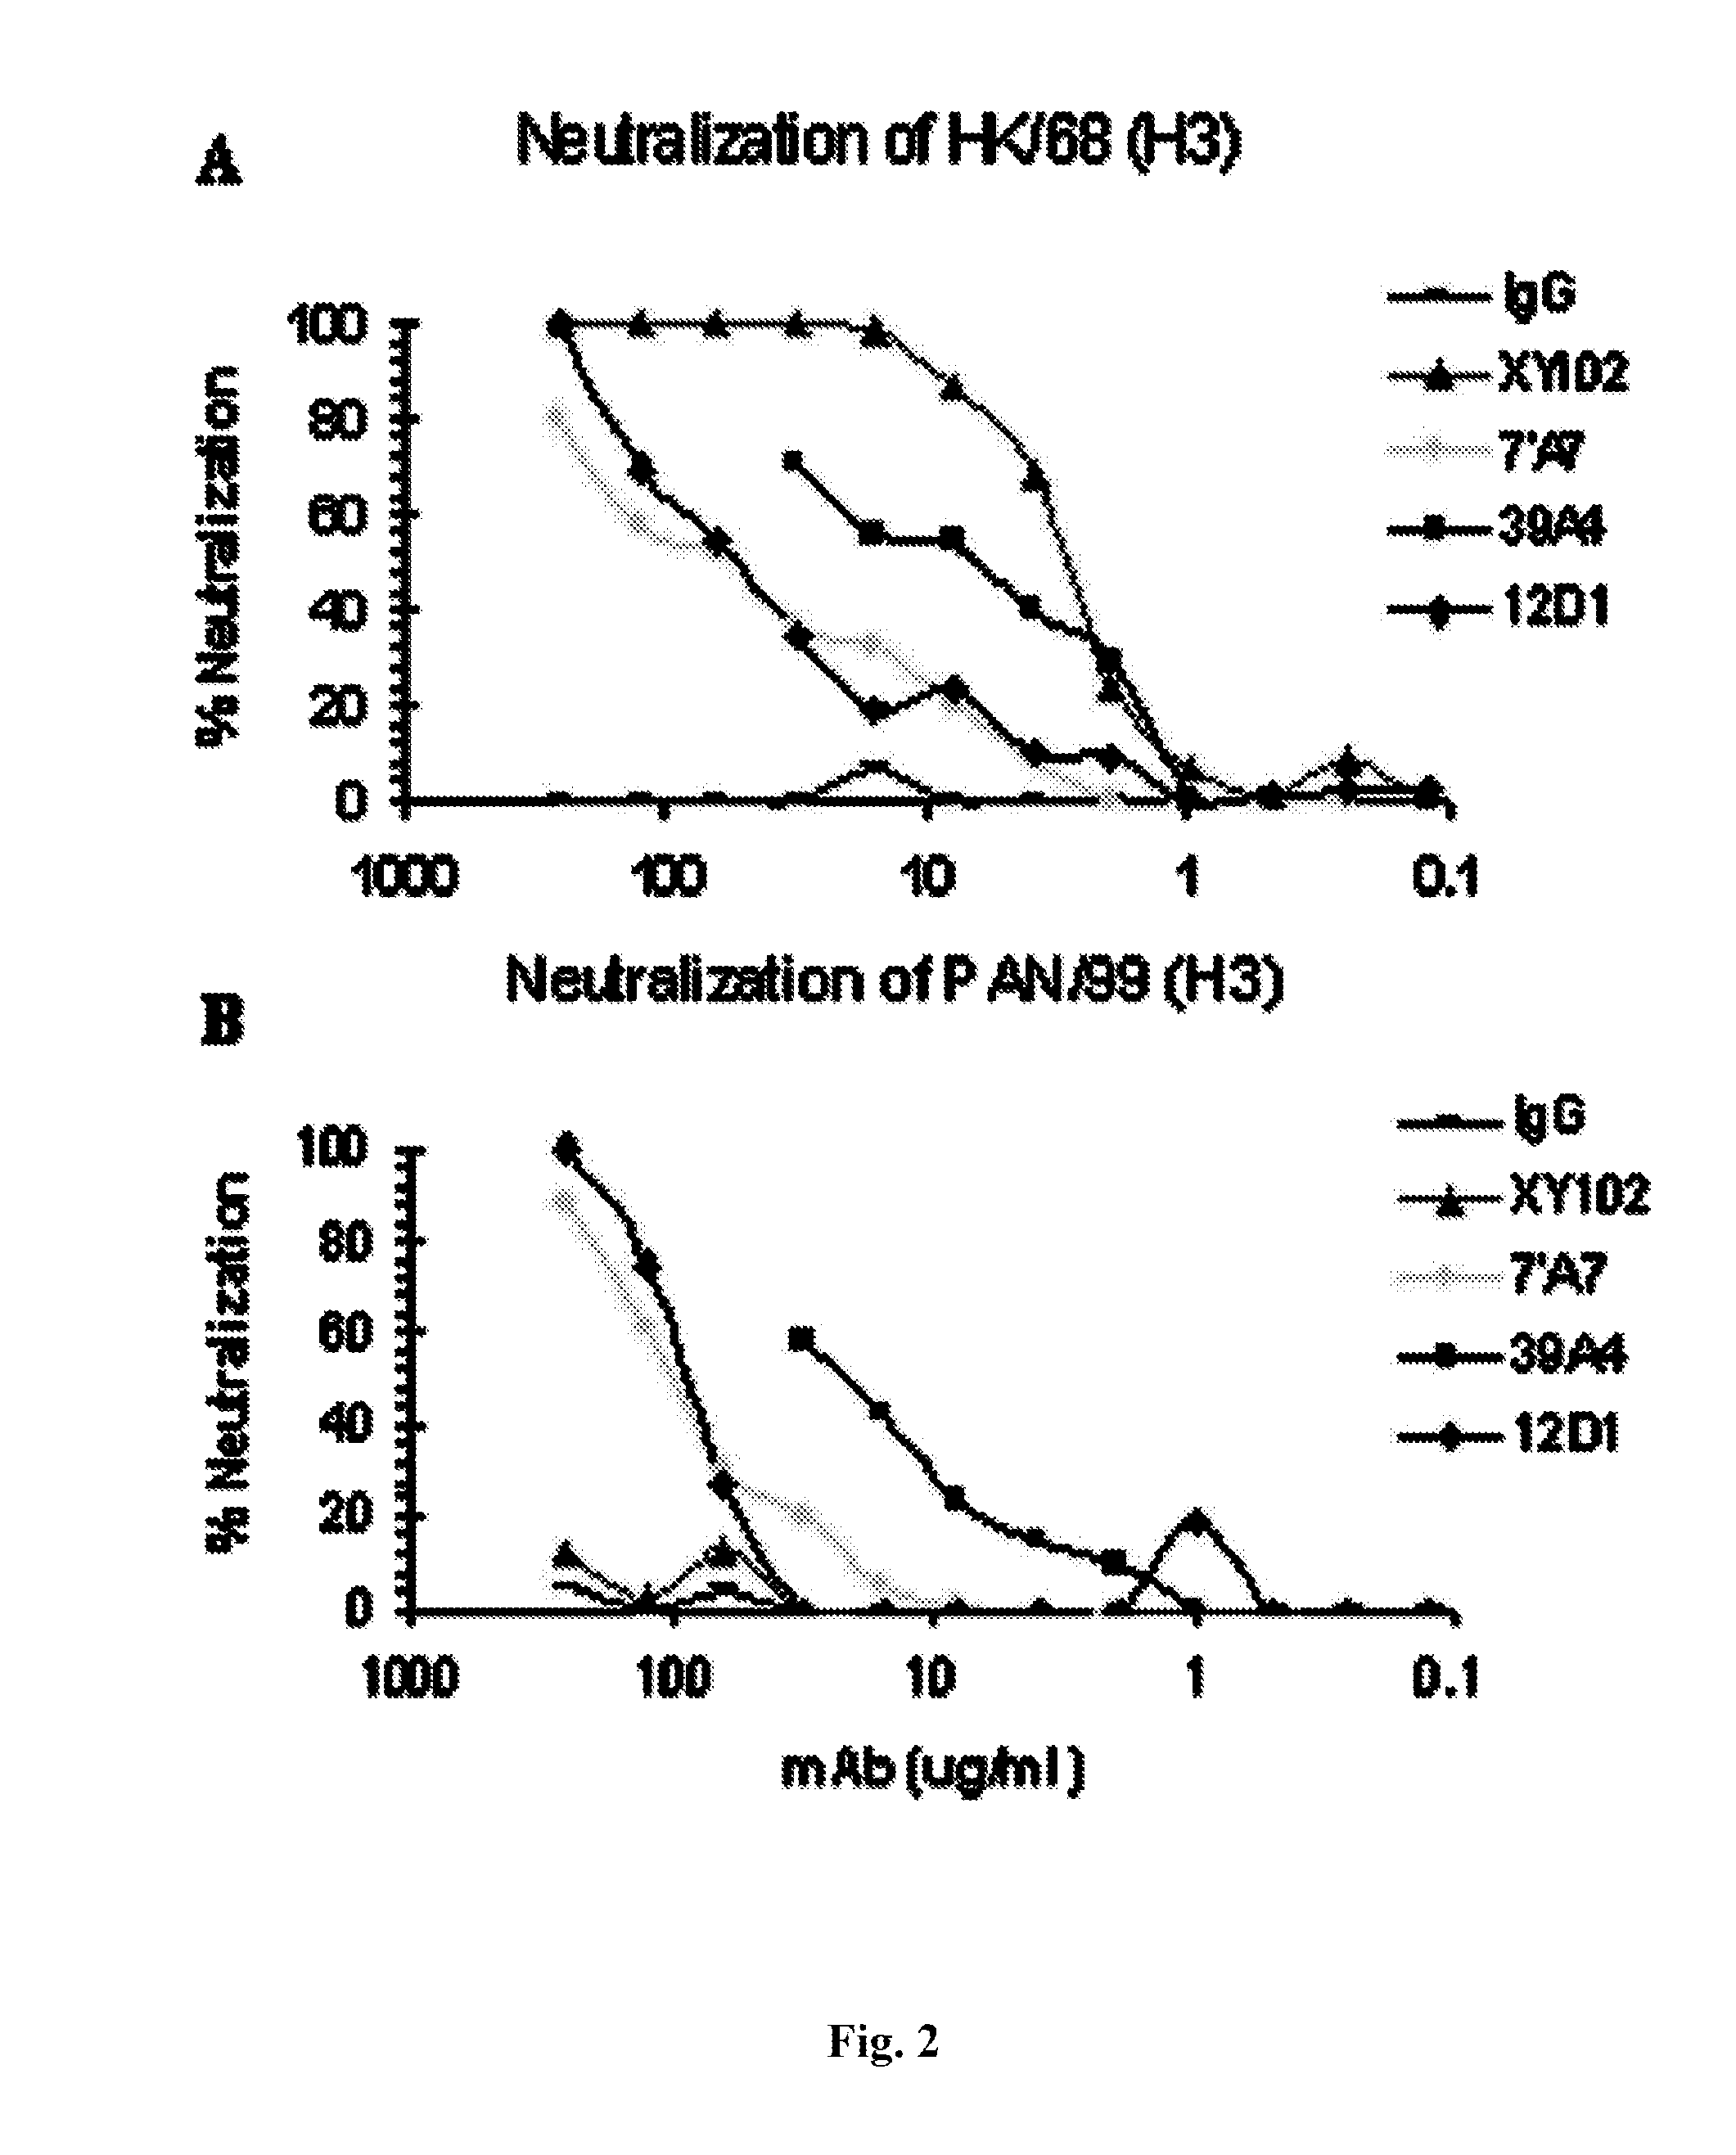 Monoclonal antibodies against influenza virus generated by cyclical administration and uses thereof